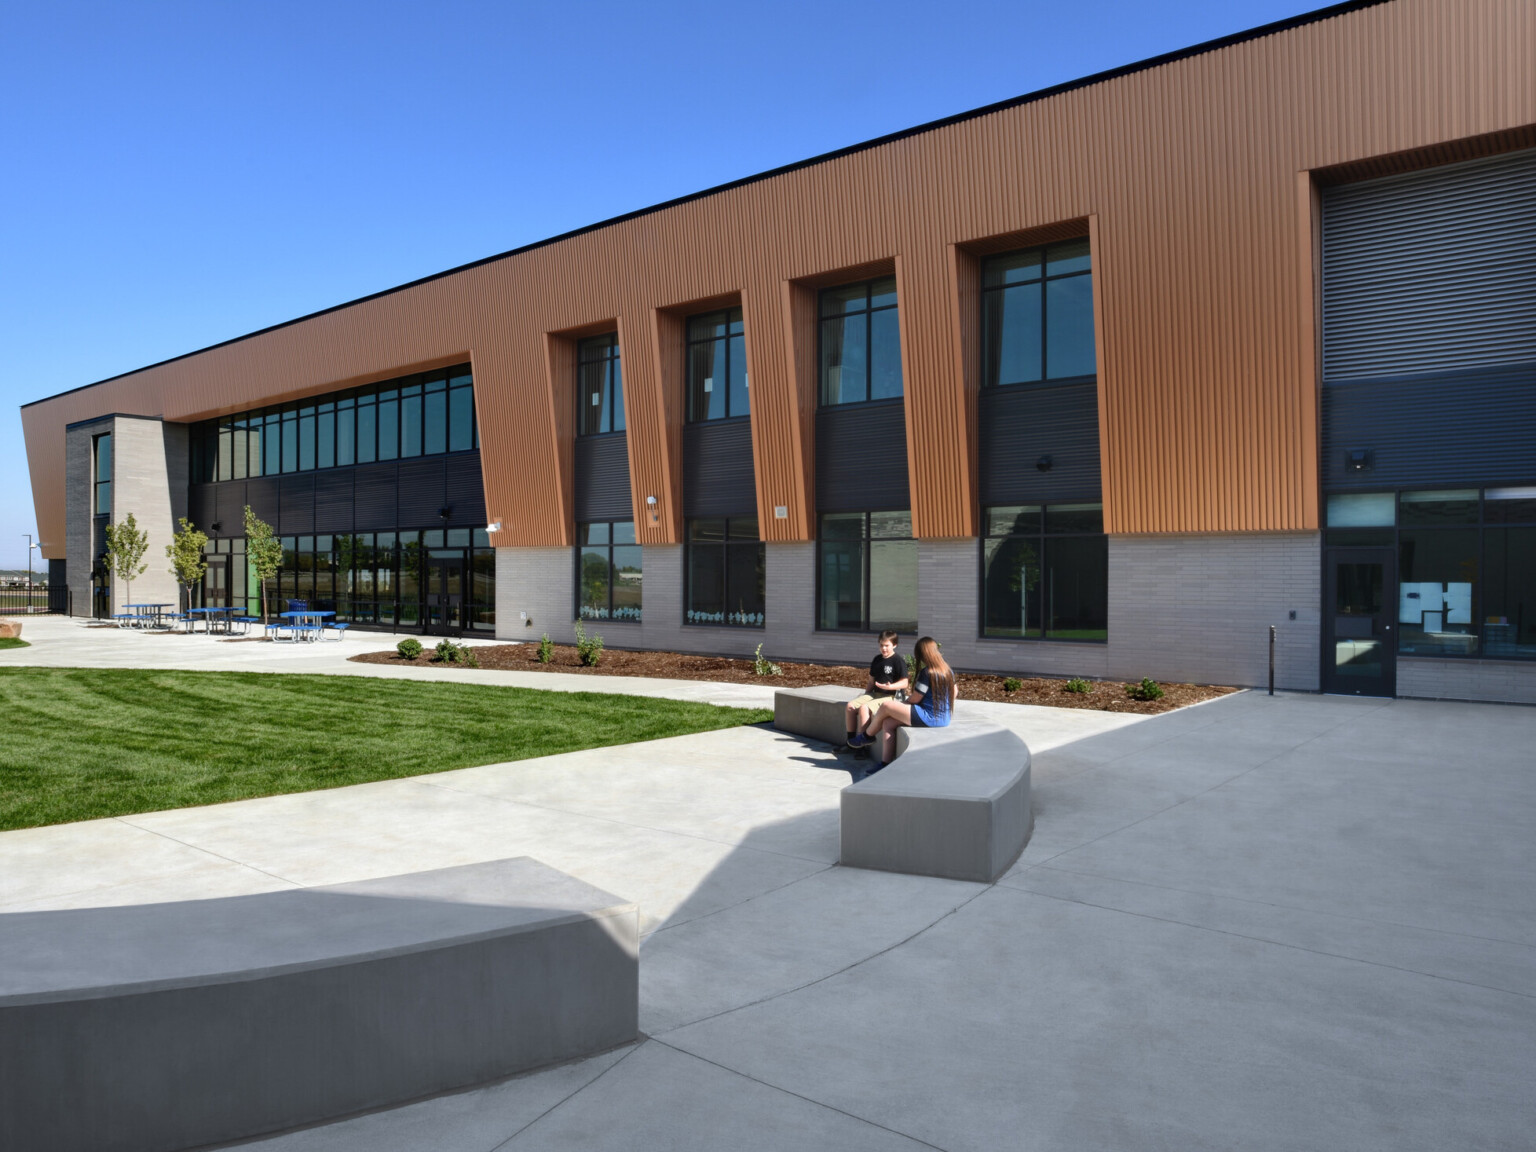 Exterior of two-story engineering academy, brick and wood façade, concrete walkway, grass, outdoor seating, tall windows, under blue skies